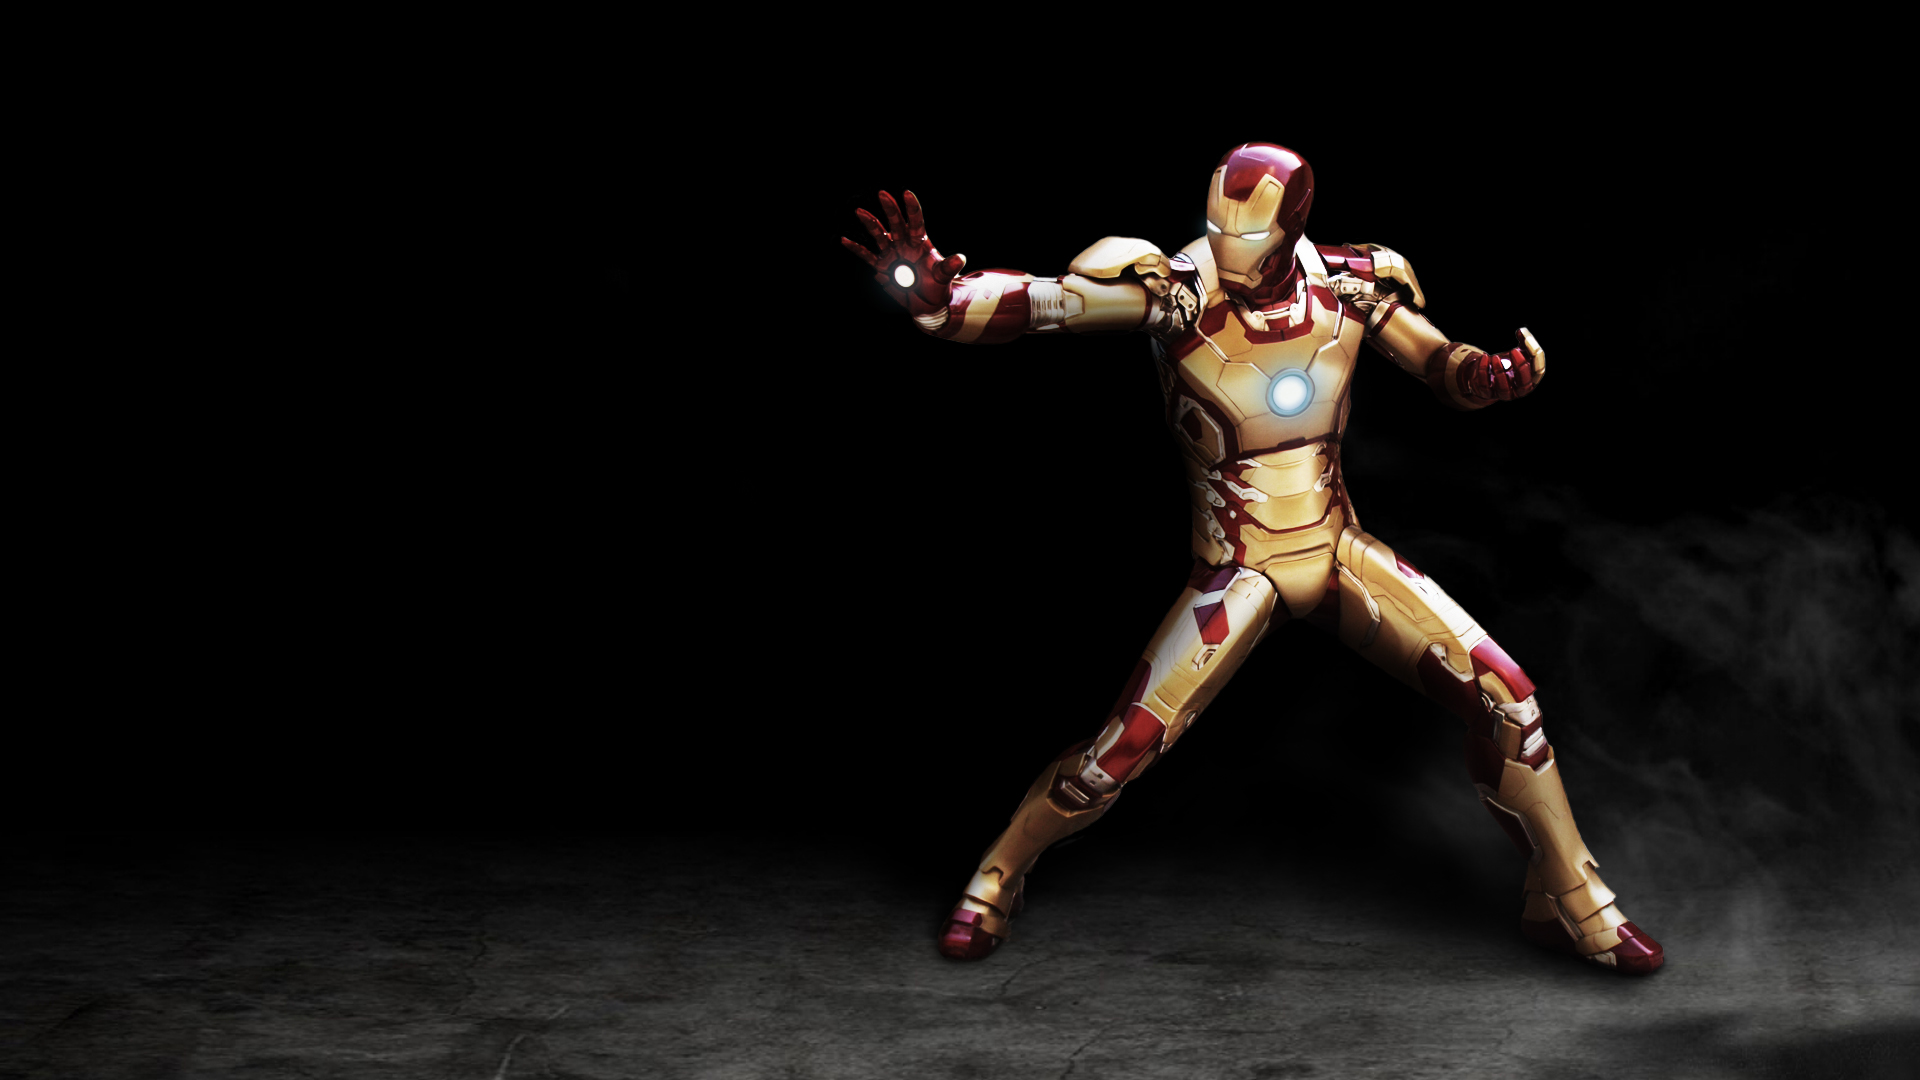 Cool Iron Man Wallpaper Best Is High Definition You